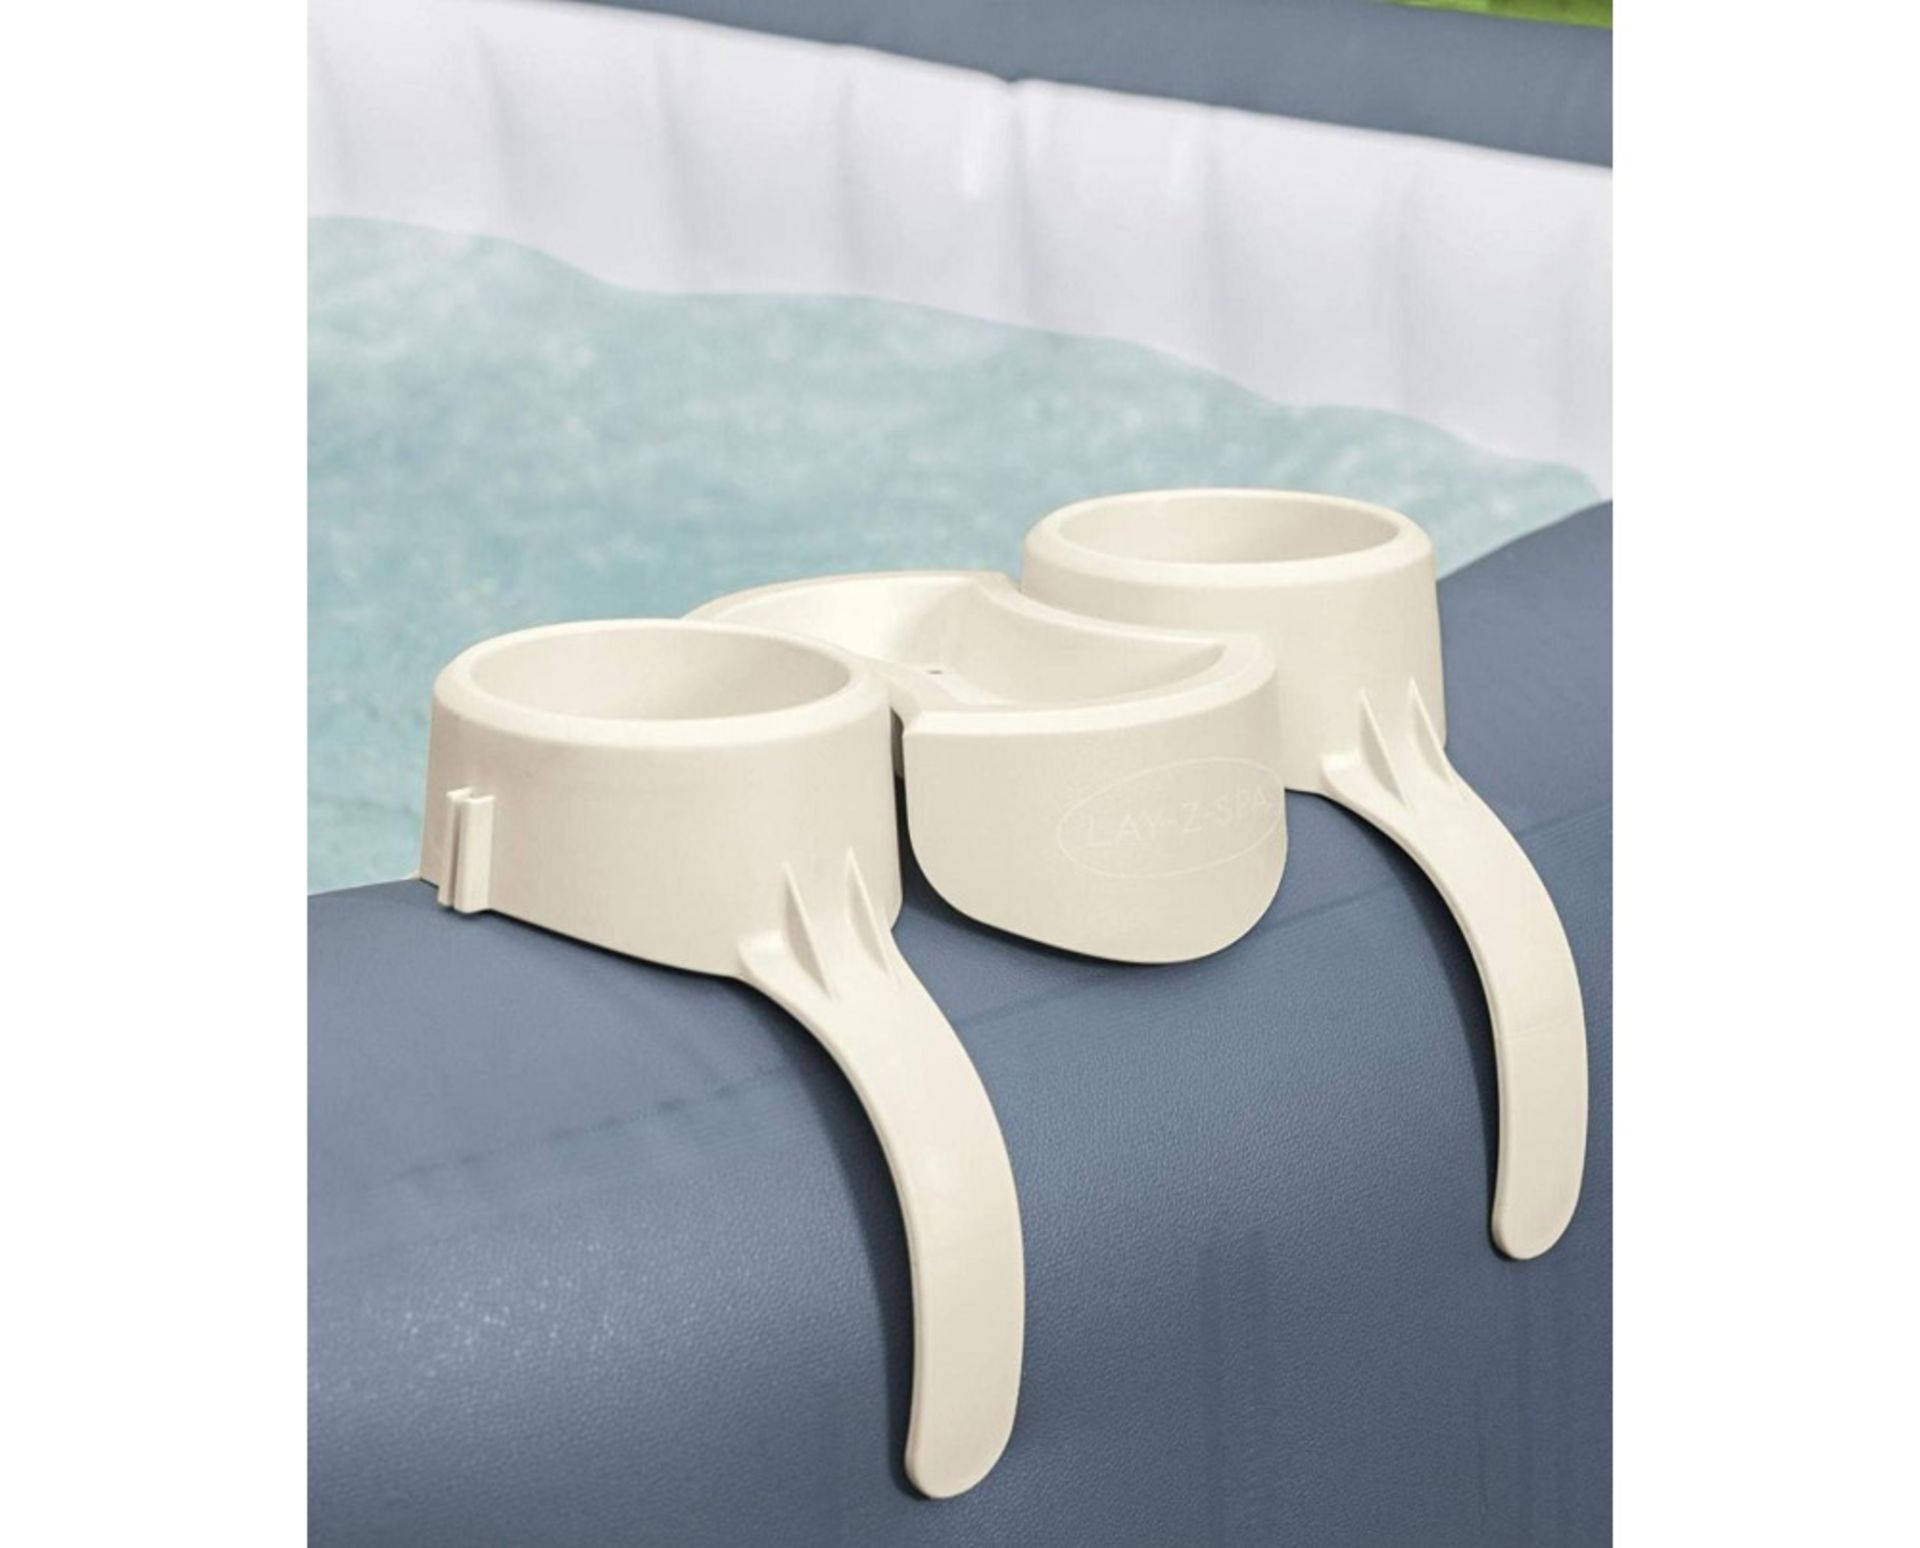 27 X BRAND NEW LAY-Z-SPA EXTRAS HOT TUB DRINKS HOLDER AND SNACK TRAY - CLIPS ON ANYWHERE ON TOP OF - Image 3 of 4